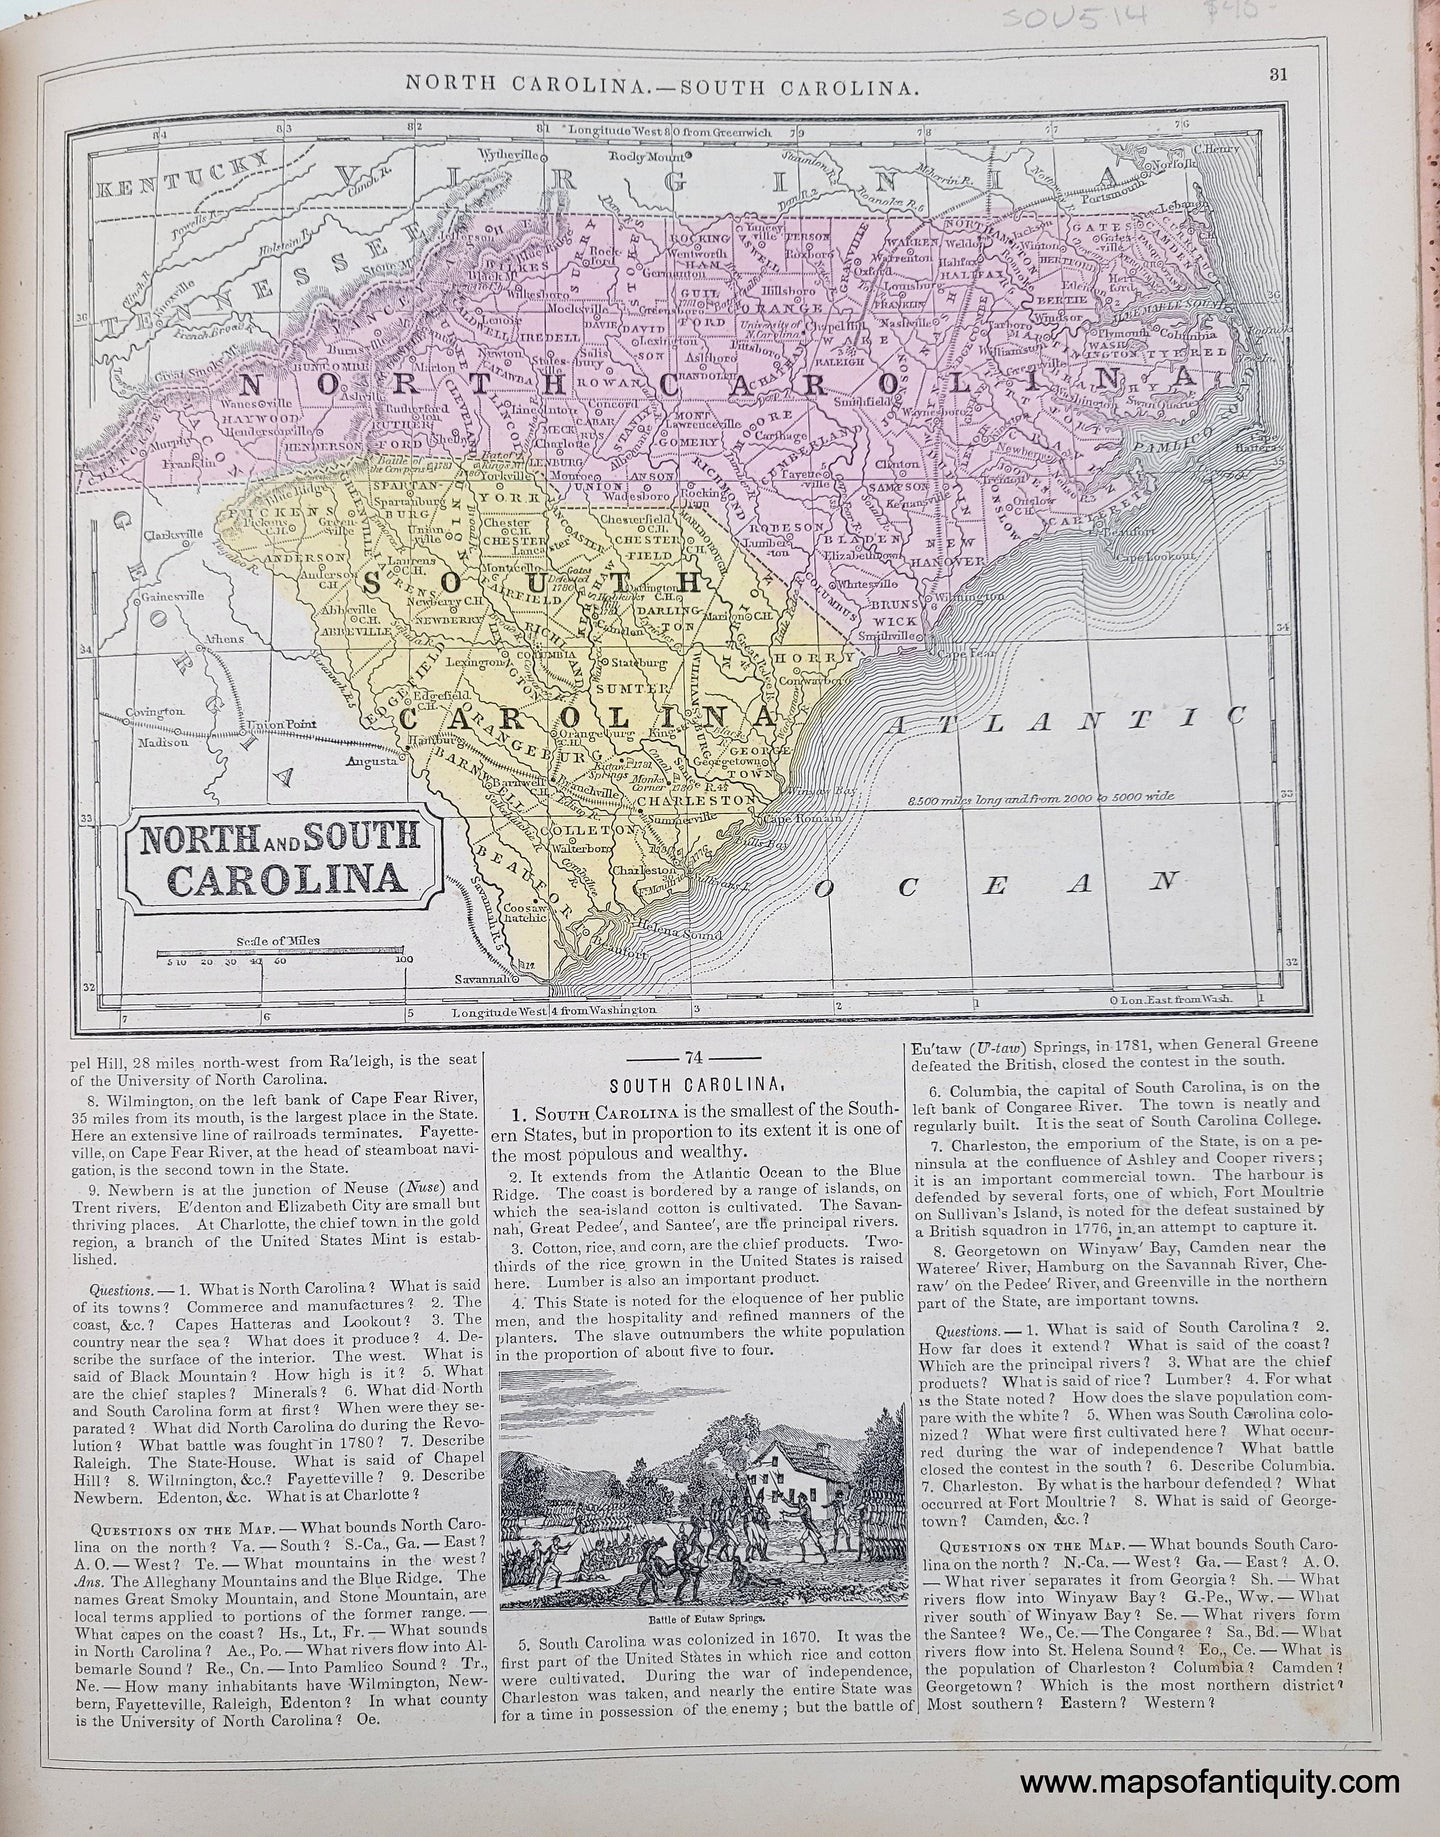 Genuine-Antique-Hand-Colored-Map-Double-sided-page-North-and-South-Carolina-verso-Georgia-and-Alabama-1850-Mitchell-Thomas-Cowperthwait-Co--Maps-Of-Antiquity